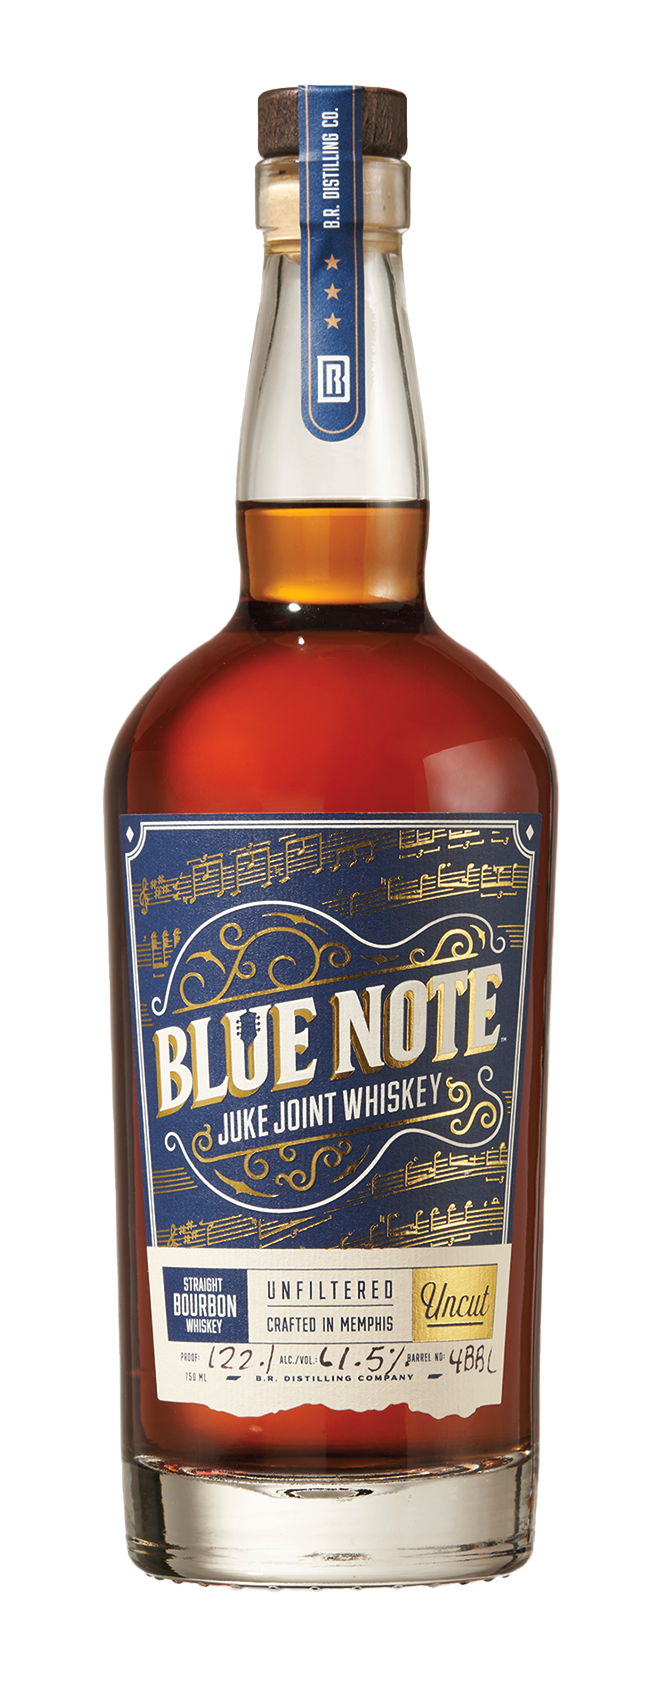 Top7 Wa0422 Bluenote The 10 Best Whiskeys Of 2022, According To 'Whisky Advocate'